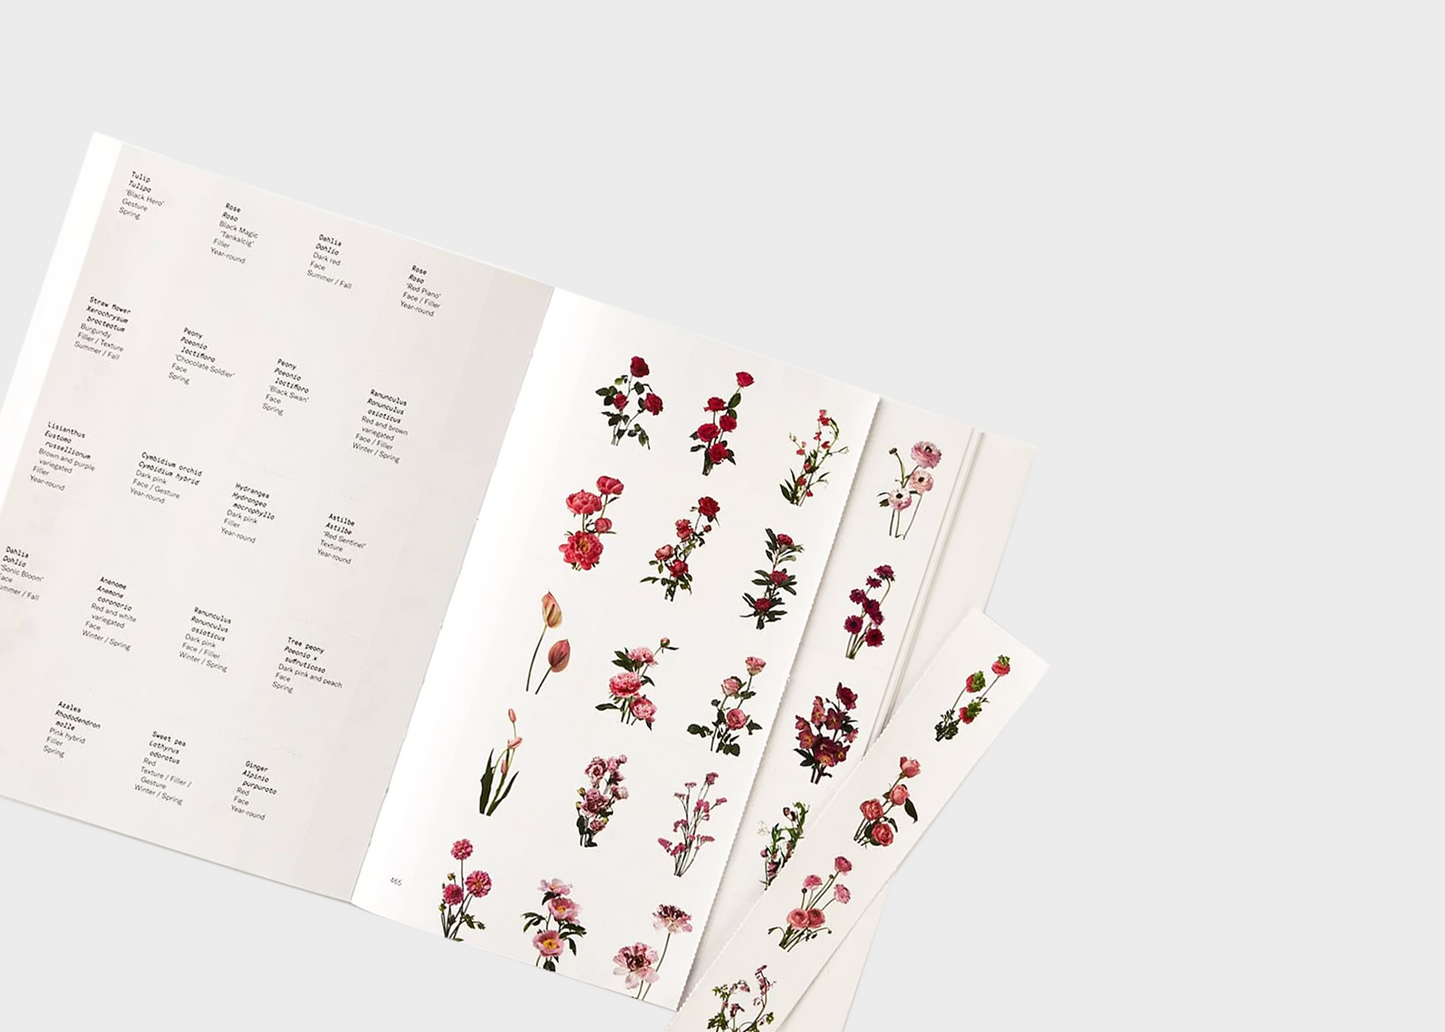 
                  
                    Flower Color Guide Book Cover by Phaidon
                  
                